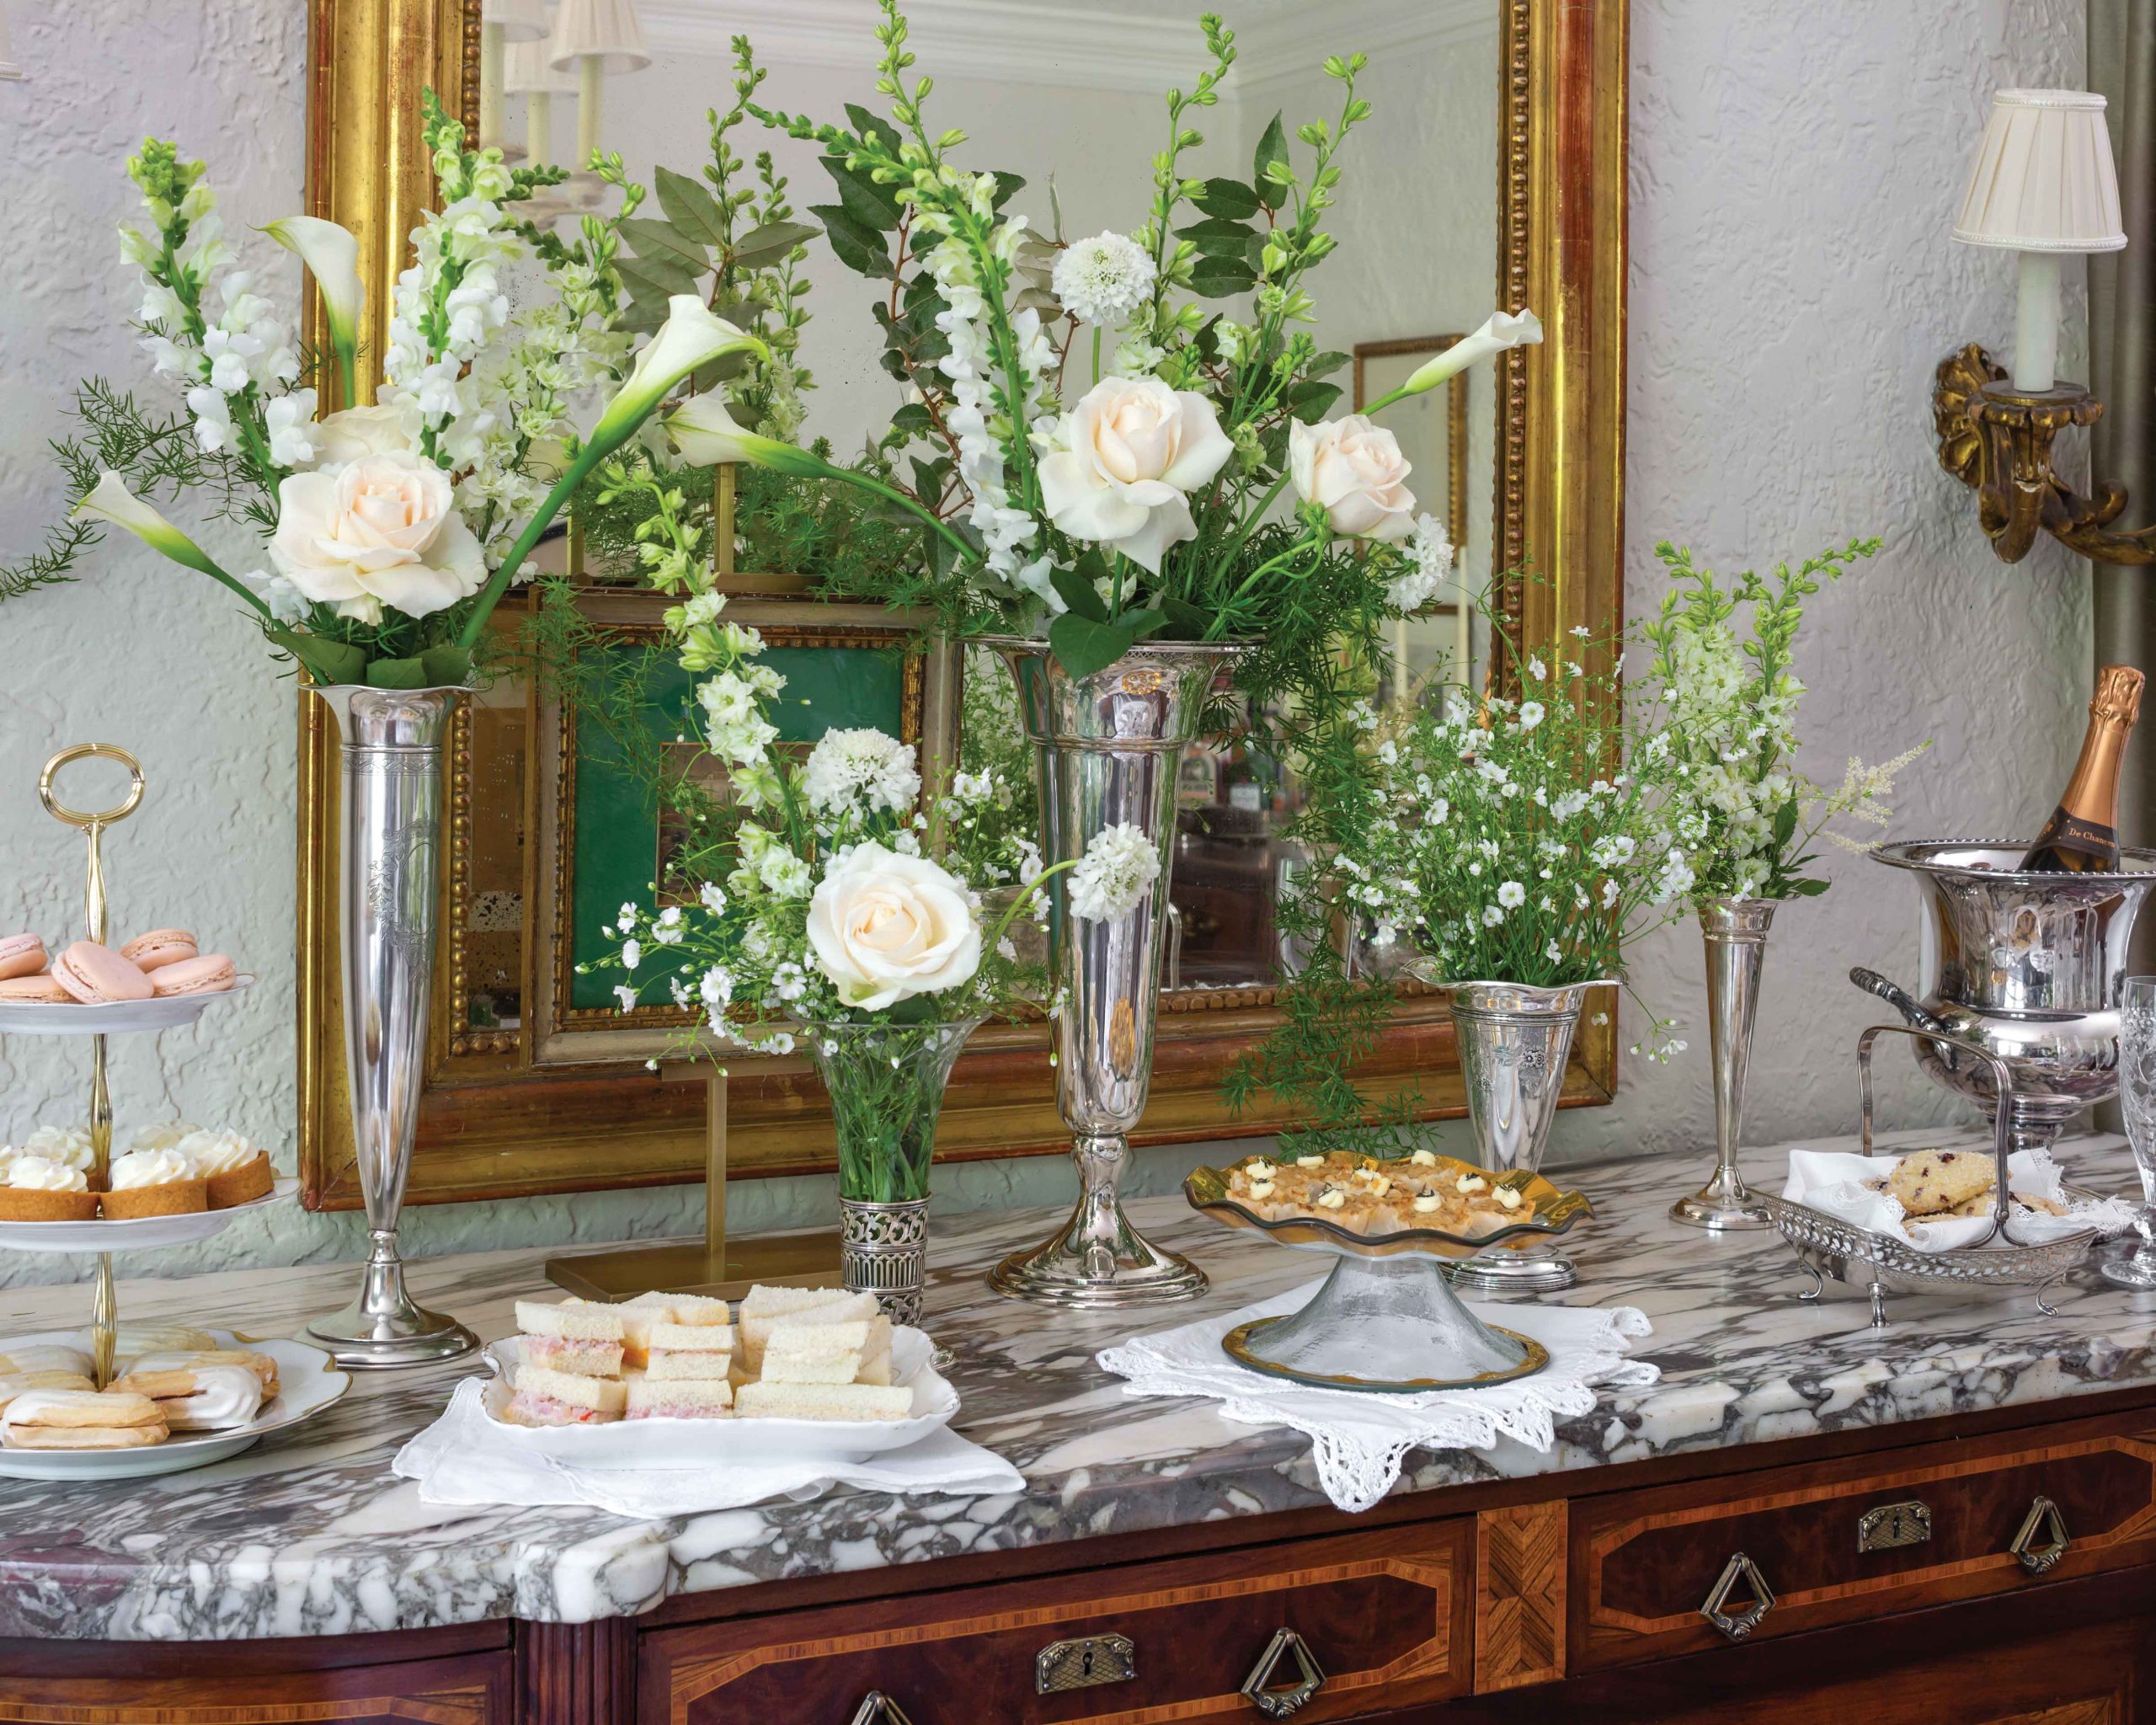 A buffet is set with trays of small dishes perfect for teatime, with a background of white roses displayed in silver vases.